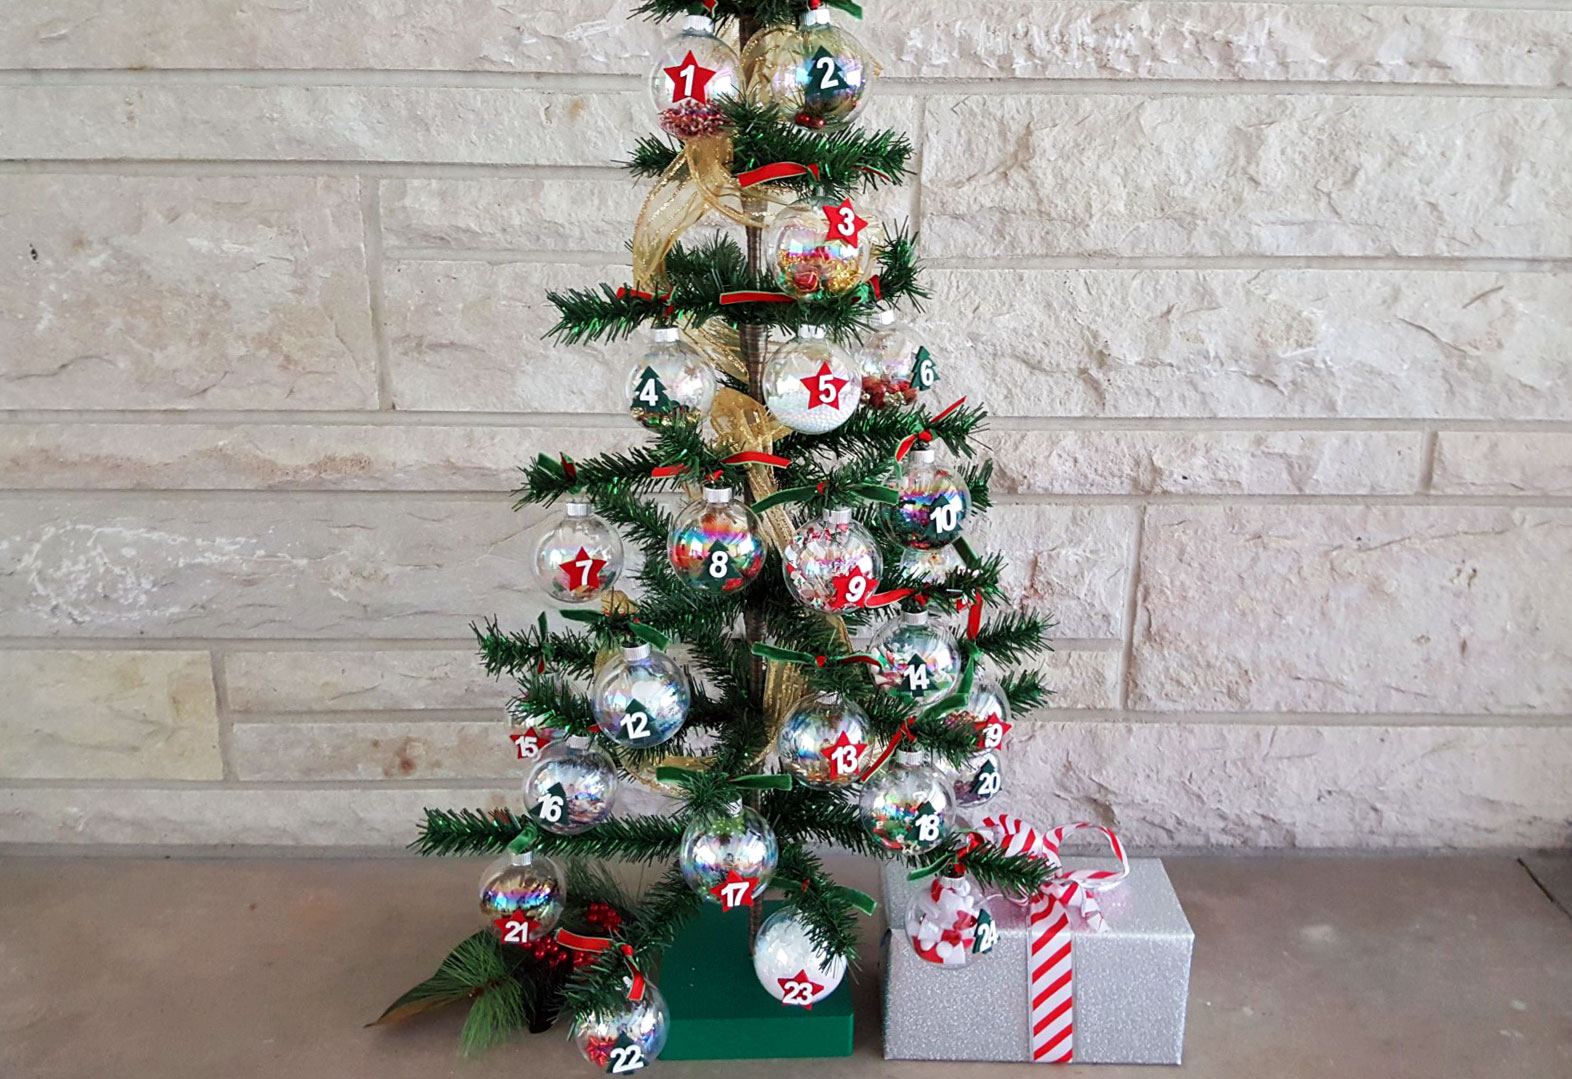 A Christmas Tree with Advent ornaments that count down until Christmas with unique Christmas-themed objects inside each one. | OrnamentShop.com